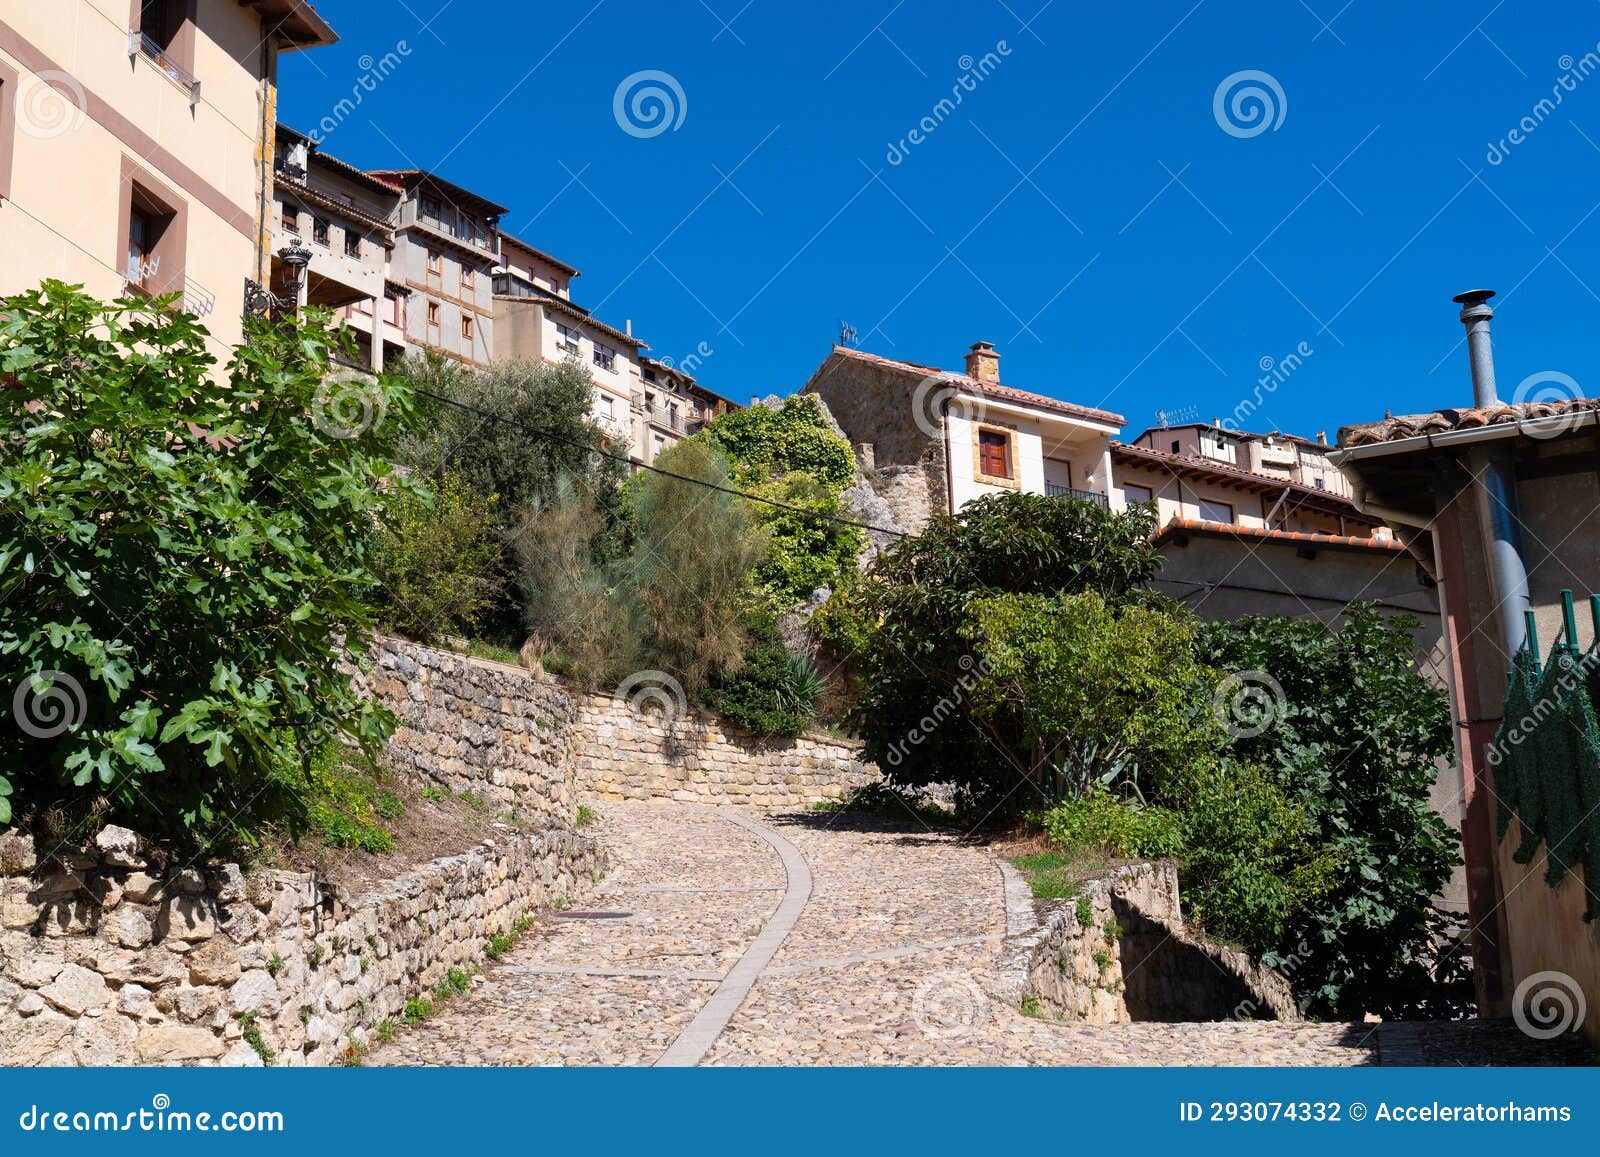 path up the hill to frias village, spain,